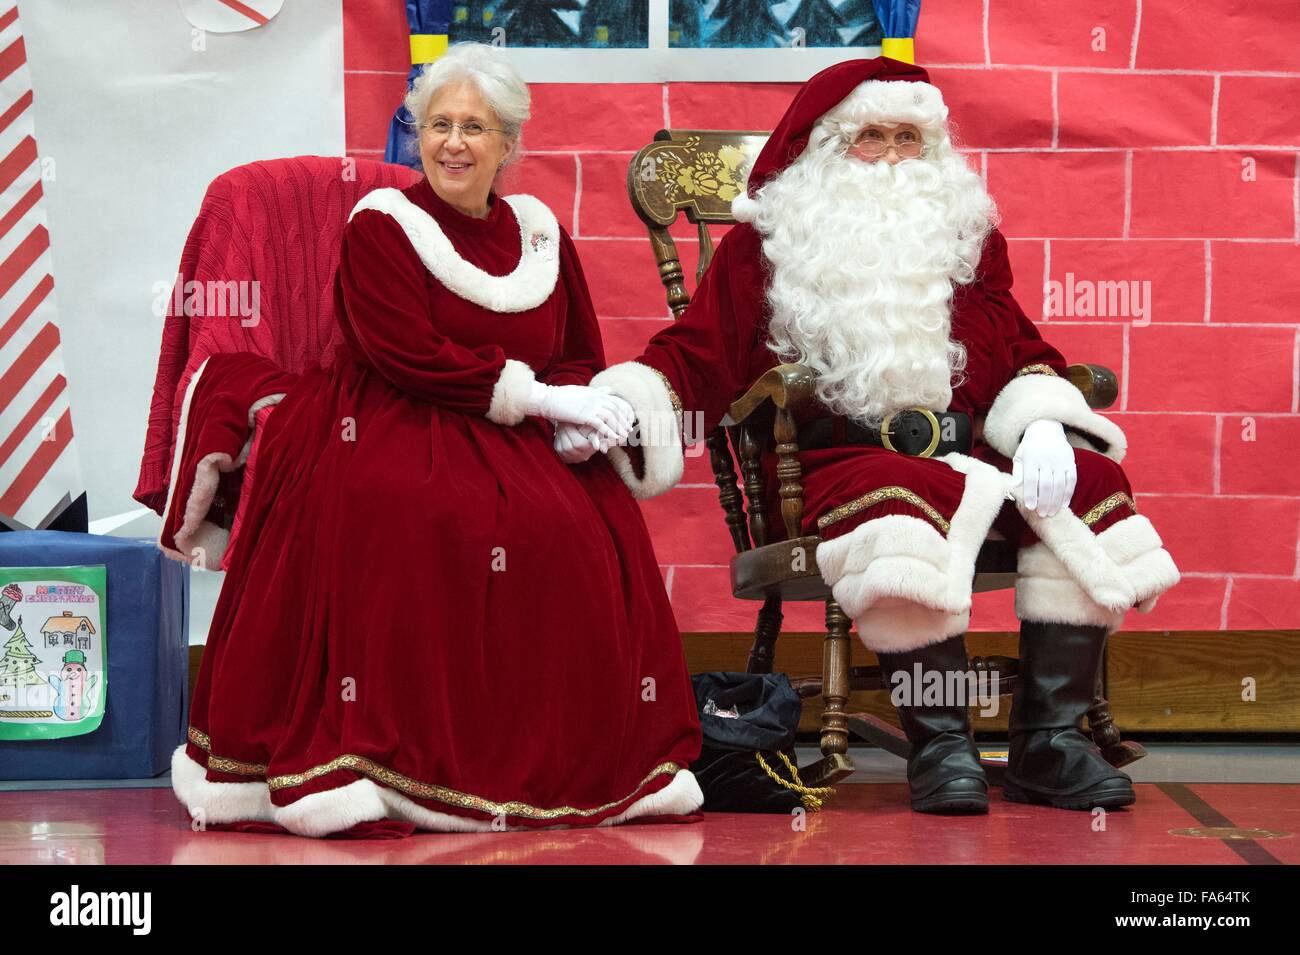 Santa Claus and Mrs Claus greet Native Alaskan children during a visit to remote villages as part of Operation Santa Claus December 5, 2015 in St. Mary's, Alaska. The program has been held for 59 years and brings Christmas cheer to underserved, remote villages across Alaska. Stock Photo